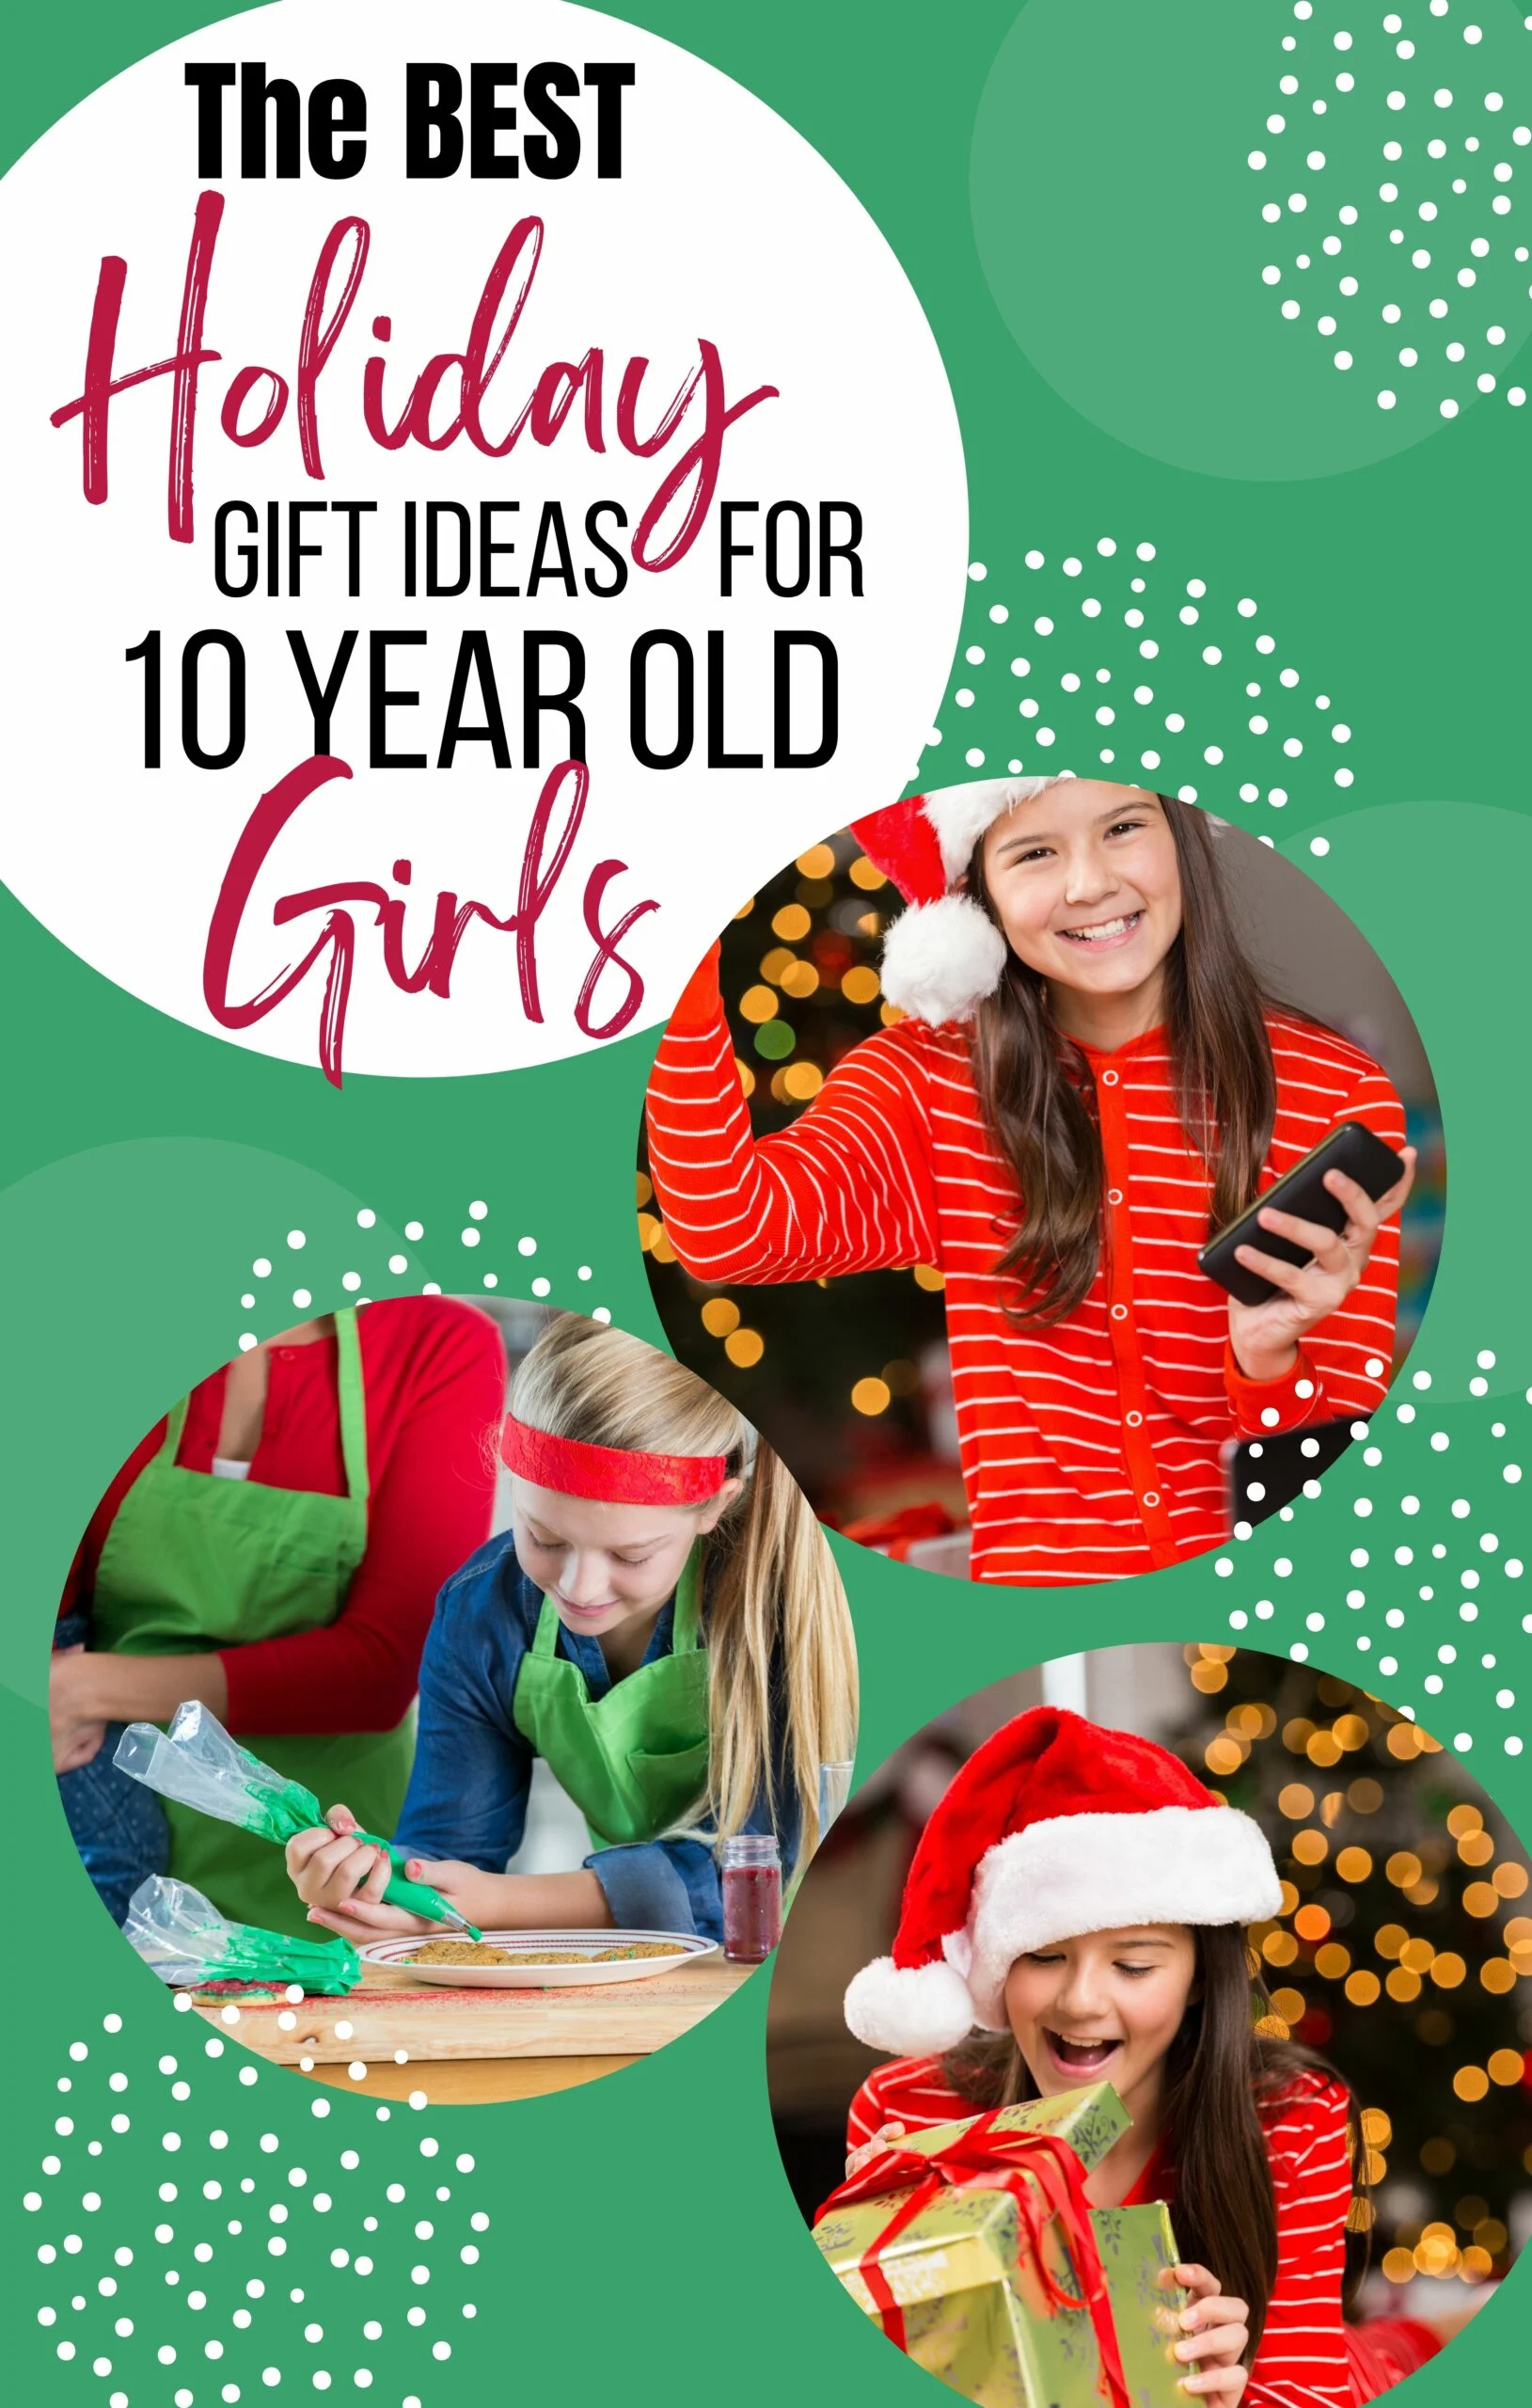 Christmas Gift Ideas for 10 Year Old Girls 1 scaled Best Gifts for 10 Year Old Girls These gifts for 10 year old girls are sure to delight any pre-teen girl who's in that in between stage!